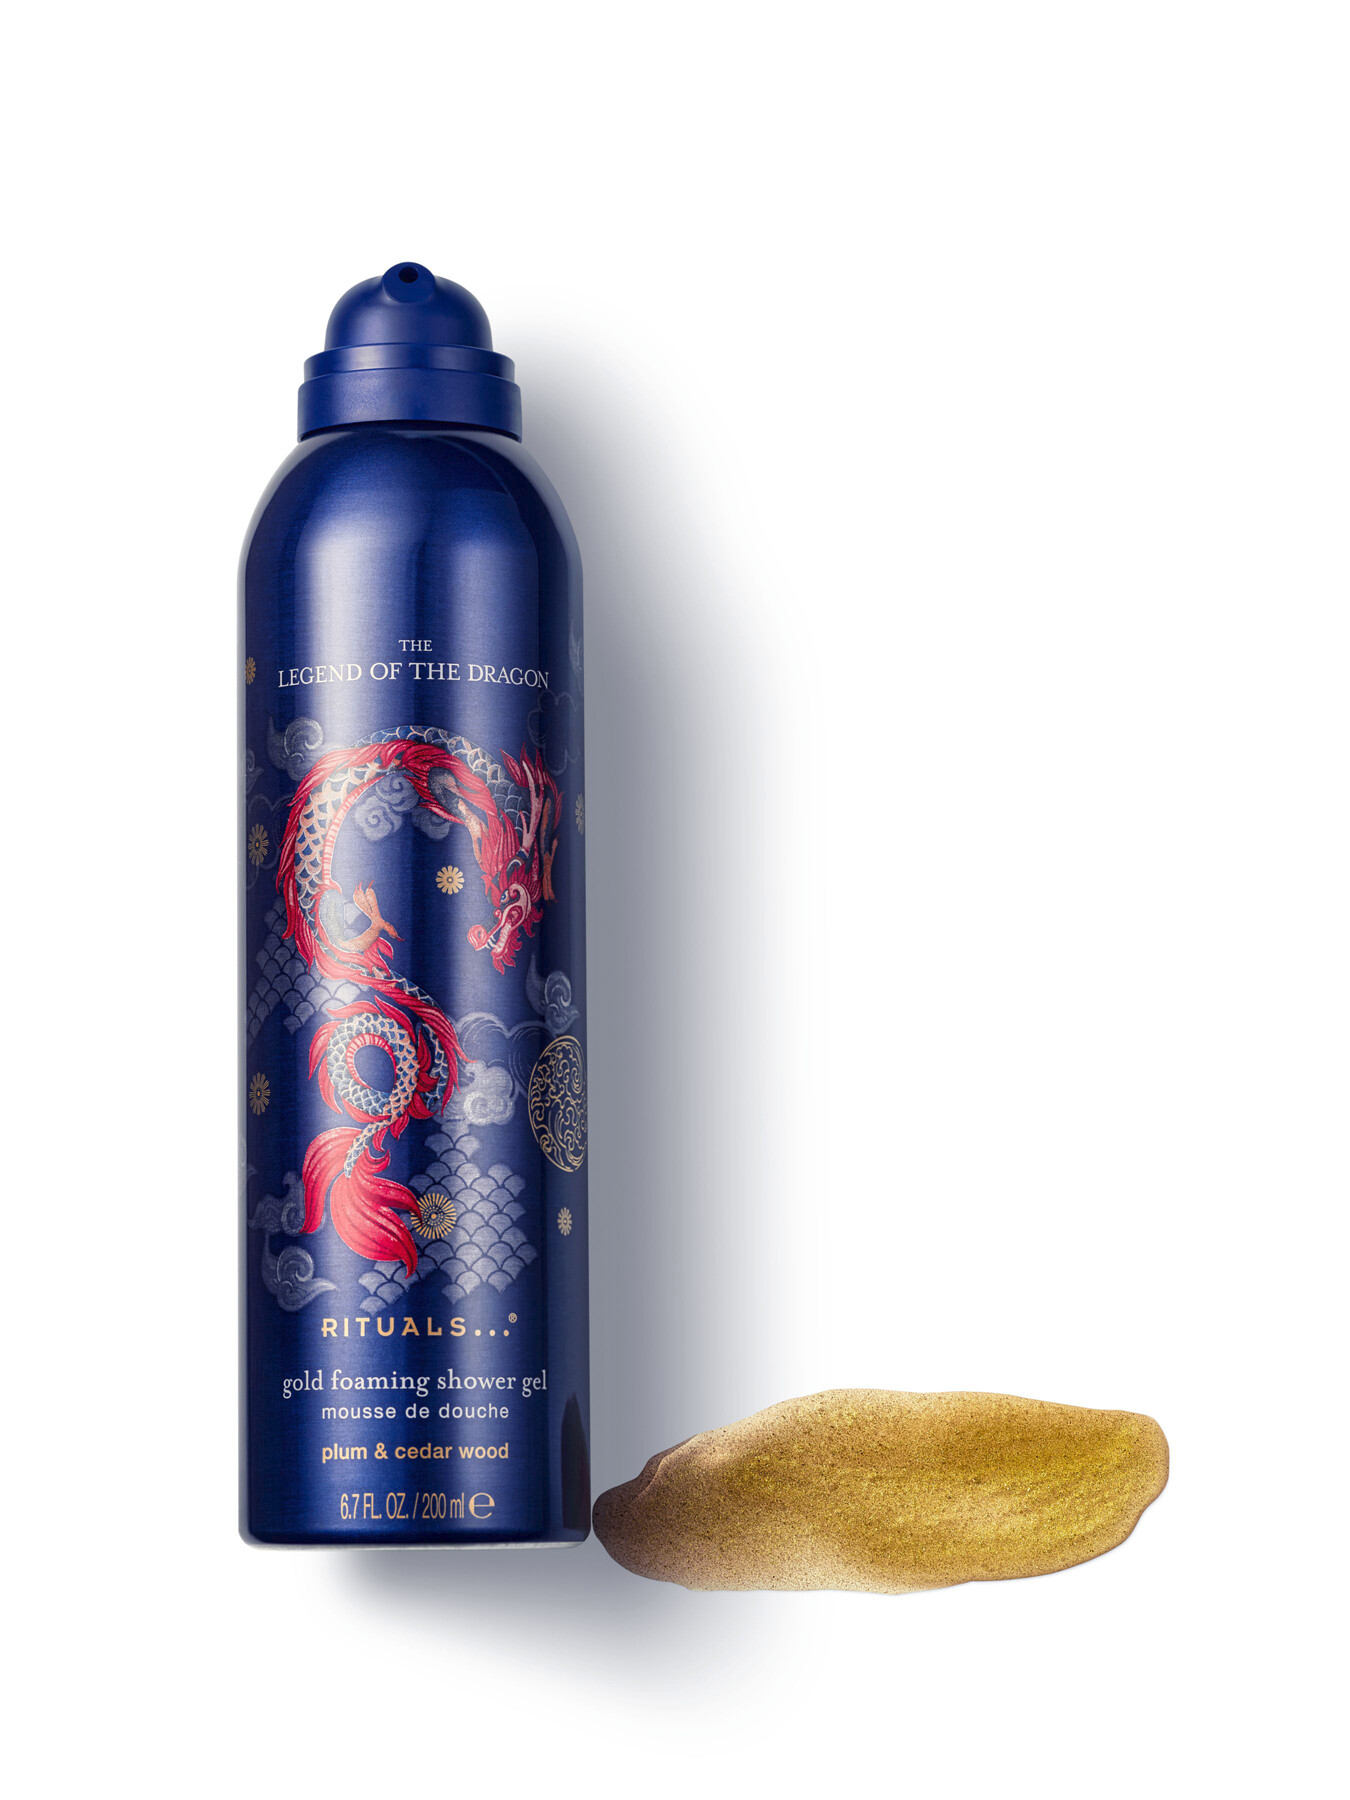 Corps & Bain: Rituals the legend of the dragon limited edition gold foaming  shower gel 200 ML